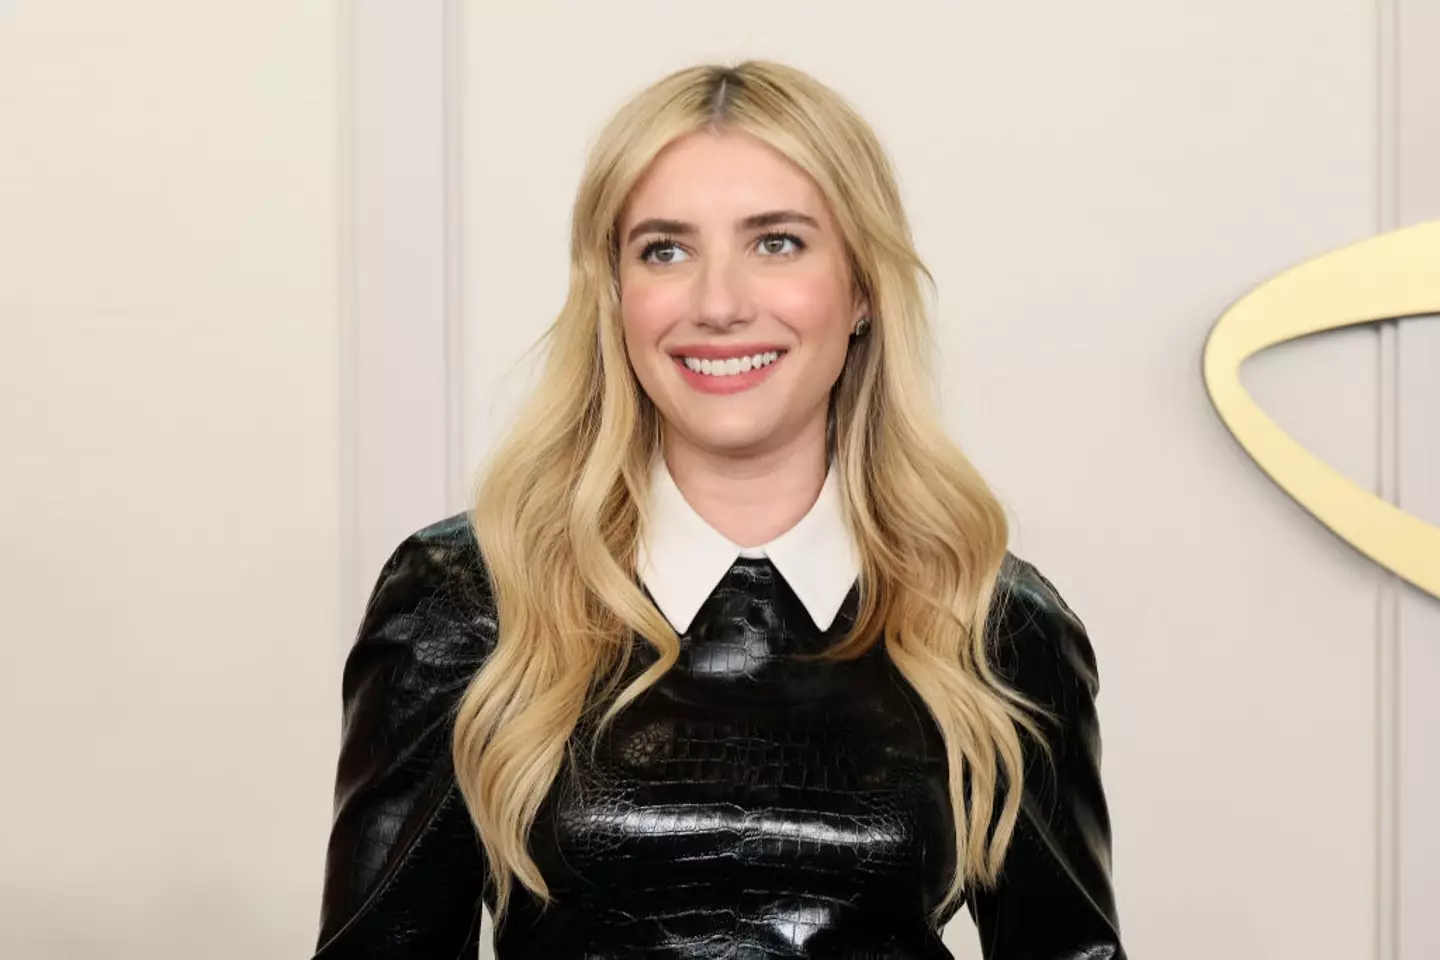 Emma Roberts has spoken about nepotism in the industry (Dia Dipasupil/Getty Images)